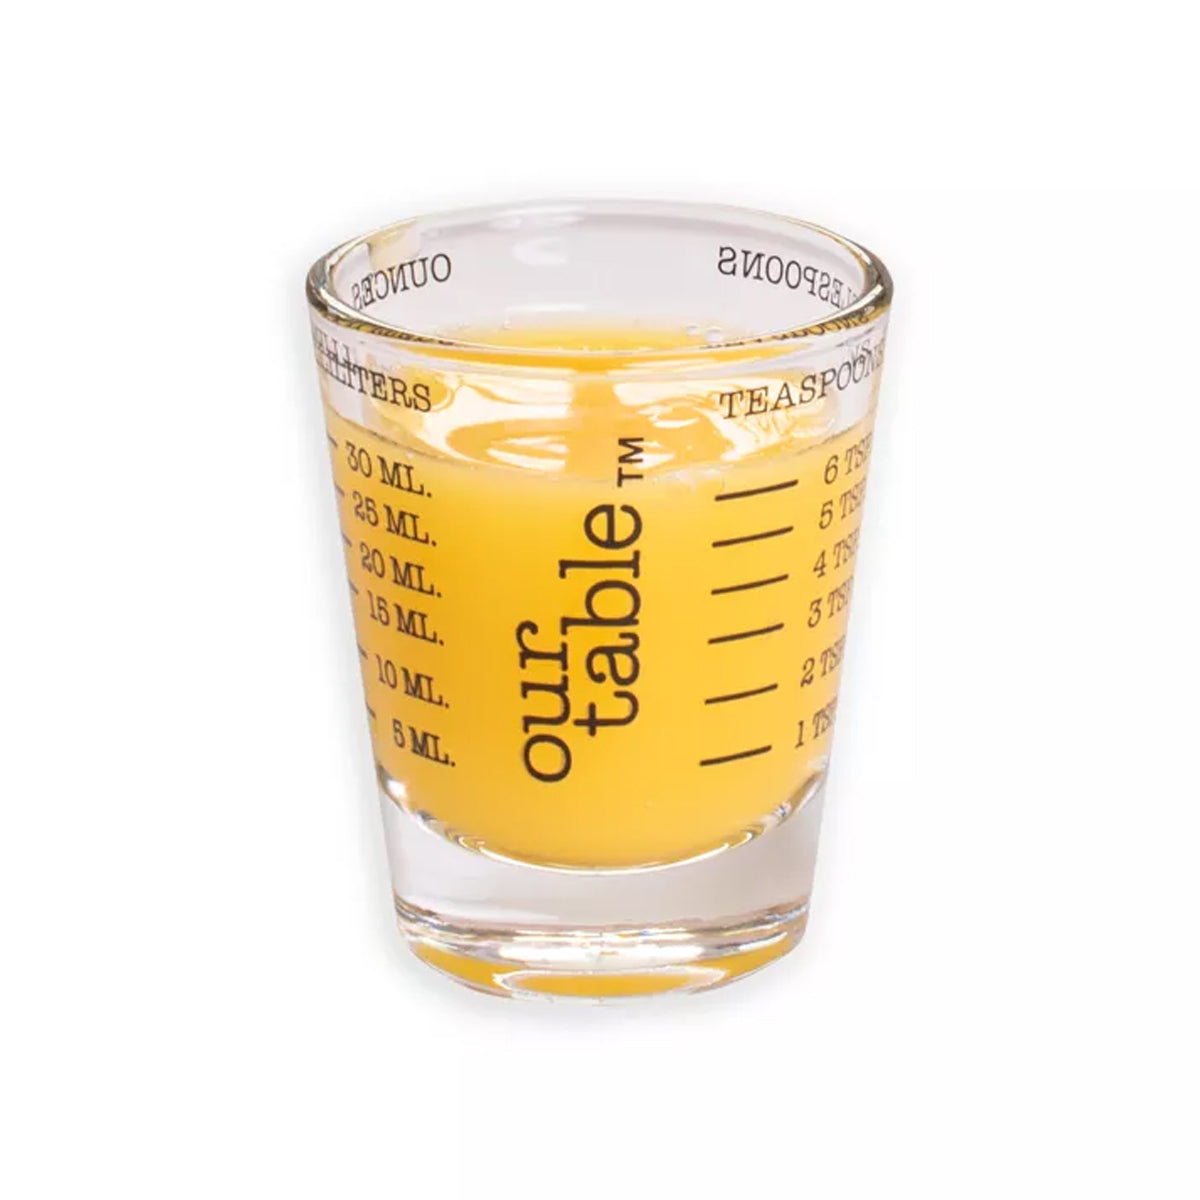 Our Table 1 Ounce Measuring Shot Glass – 20 Measurements